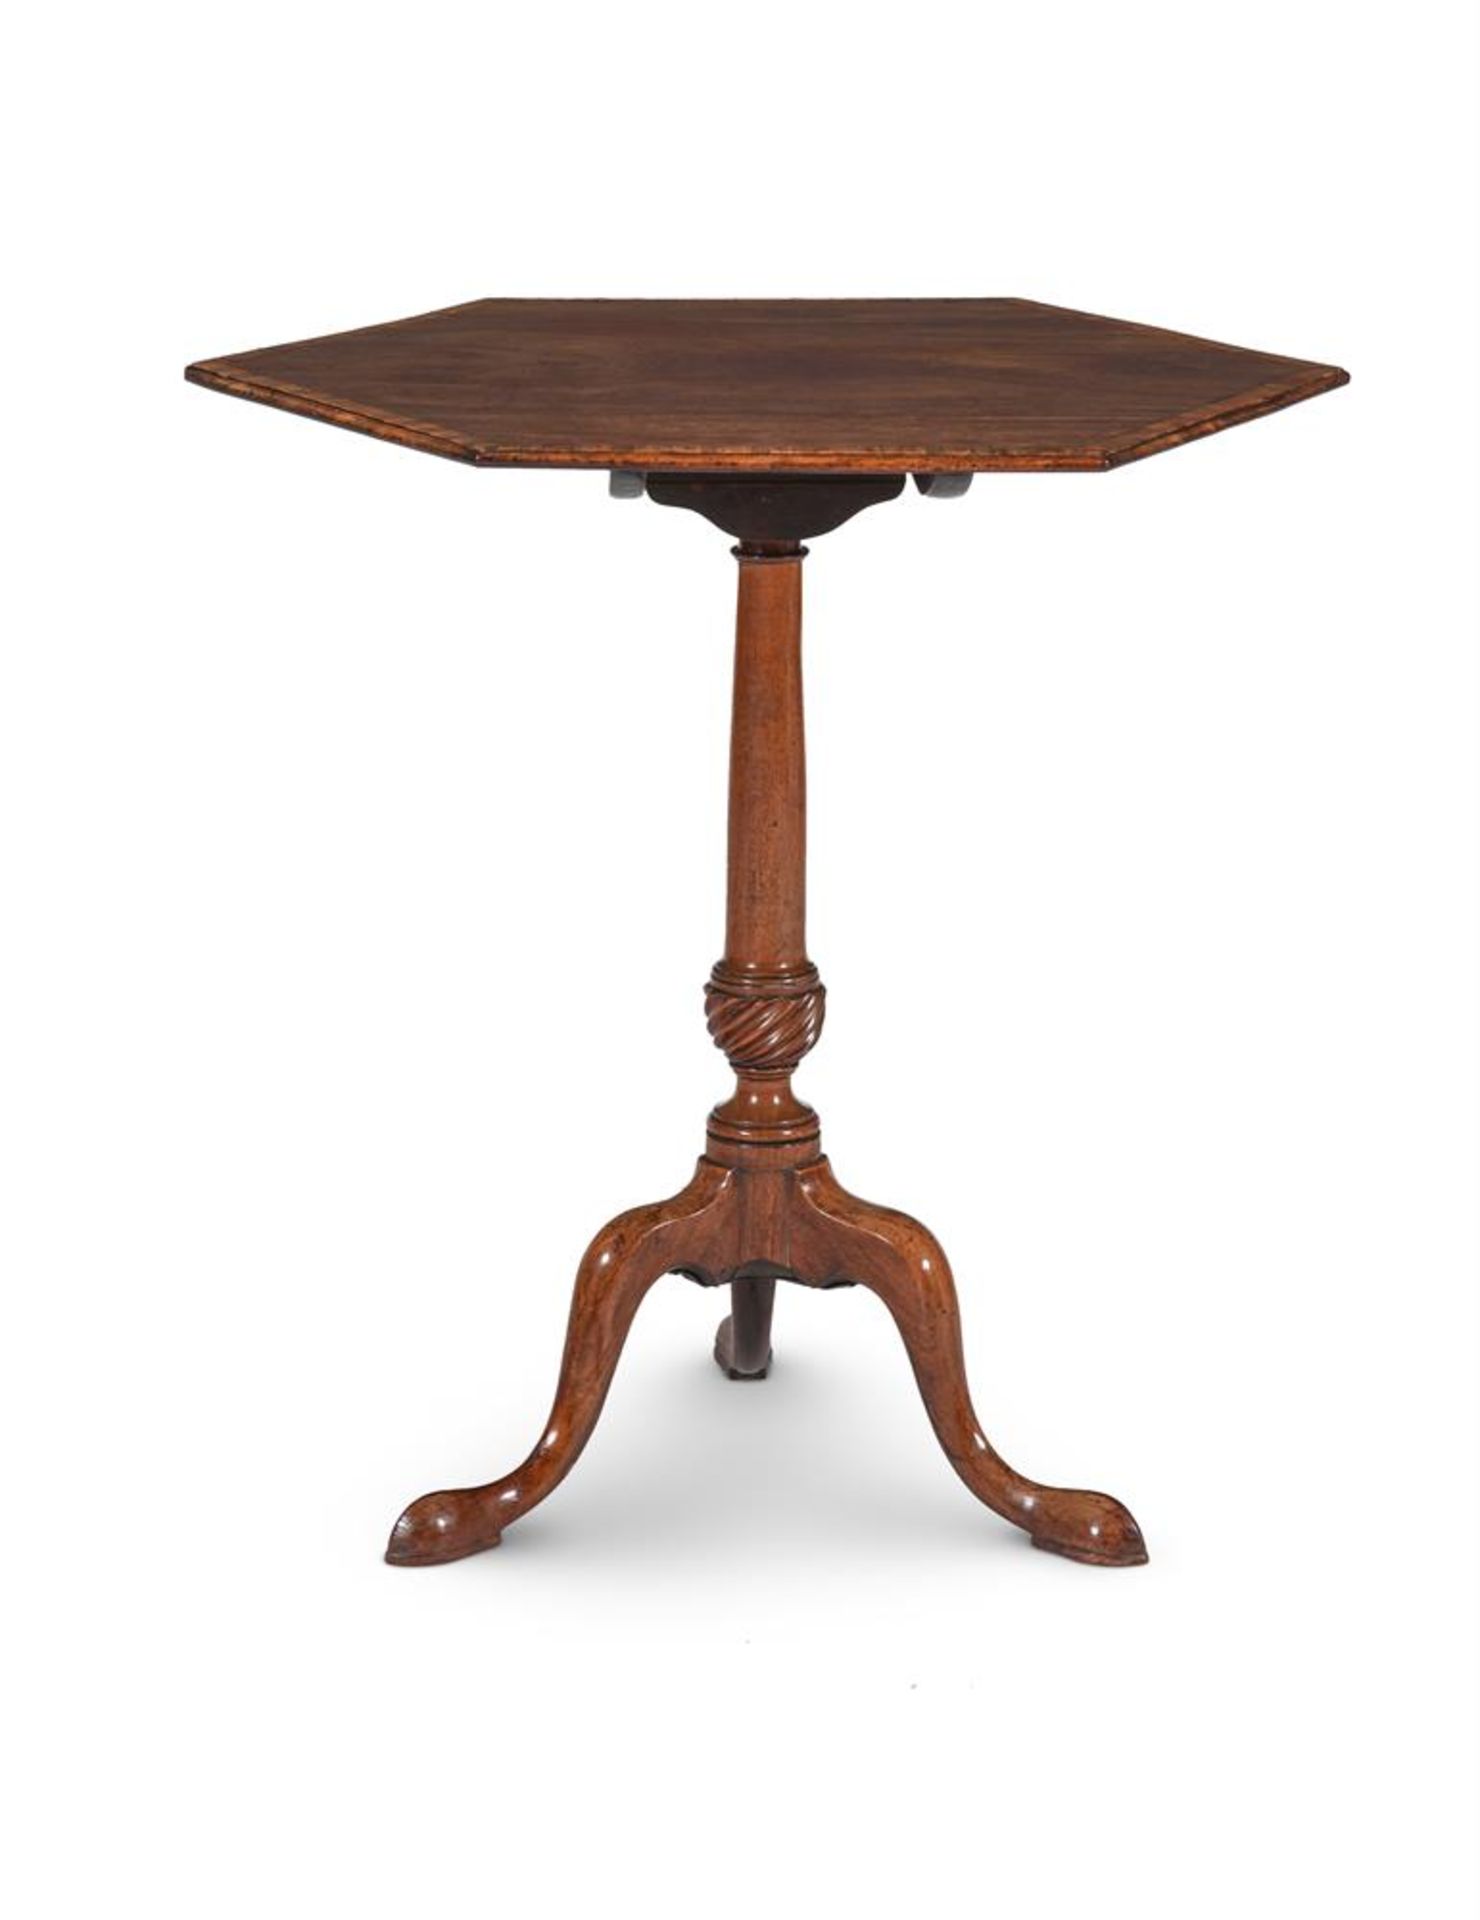 A GEORGE III GUADELOUPE MAHOGANY HEXAGONAL TRIPOD TABLE, POSSIBLY BY THOMAS CHIPPENDALE, CIRCA 1765 - Image 2 of 4